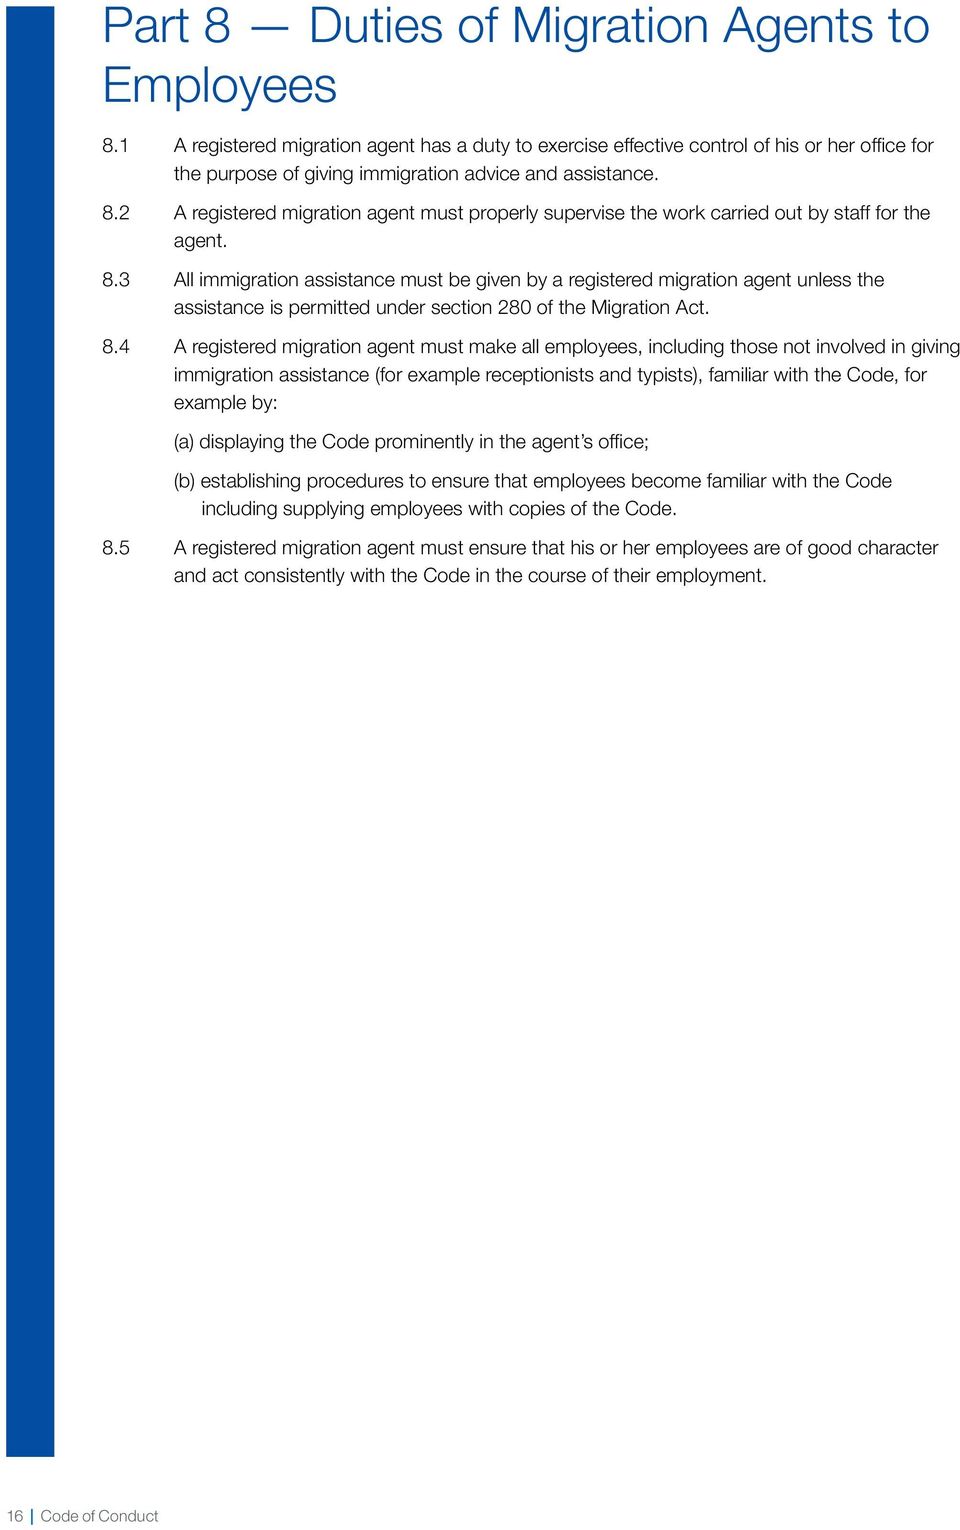 2 A registered migration agent must properly supervise the work carried out by staff for the agent. 8.